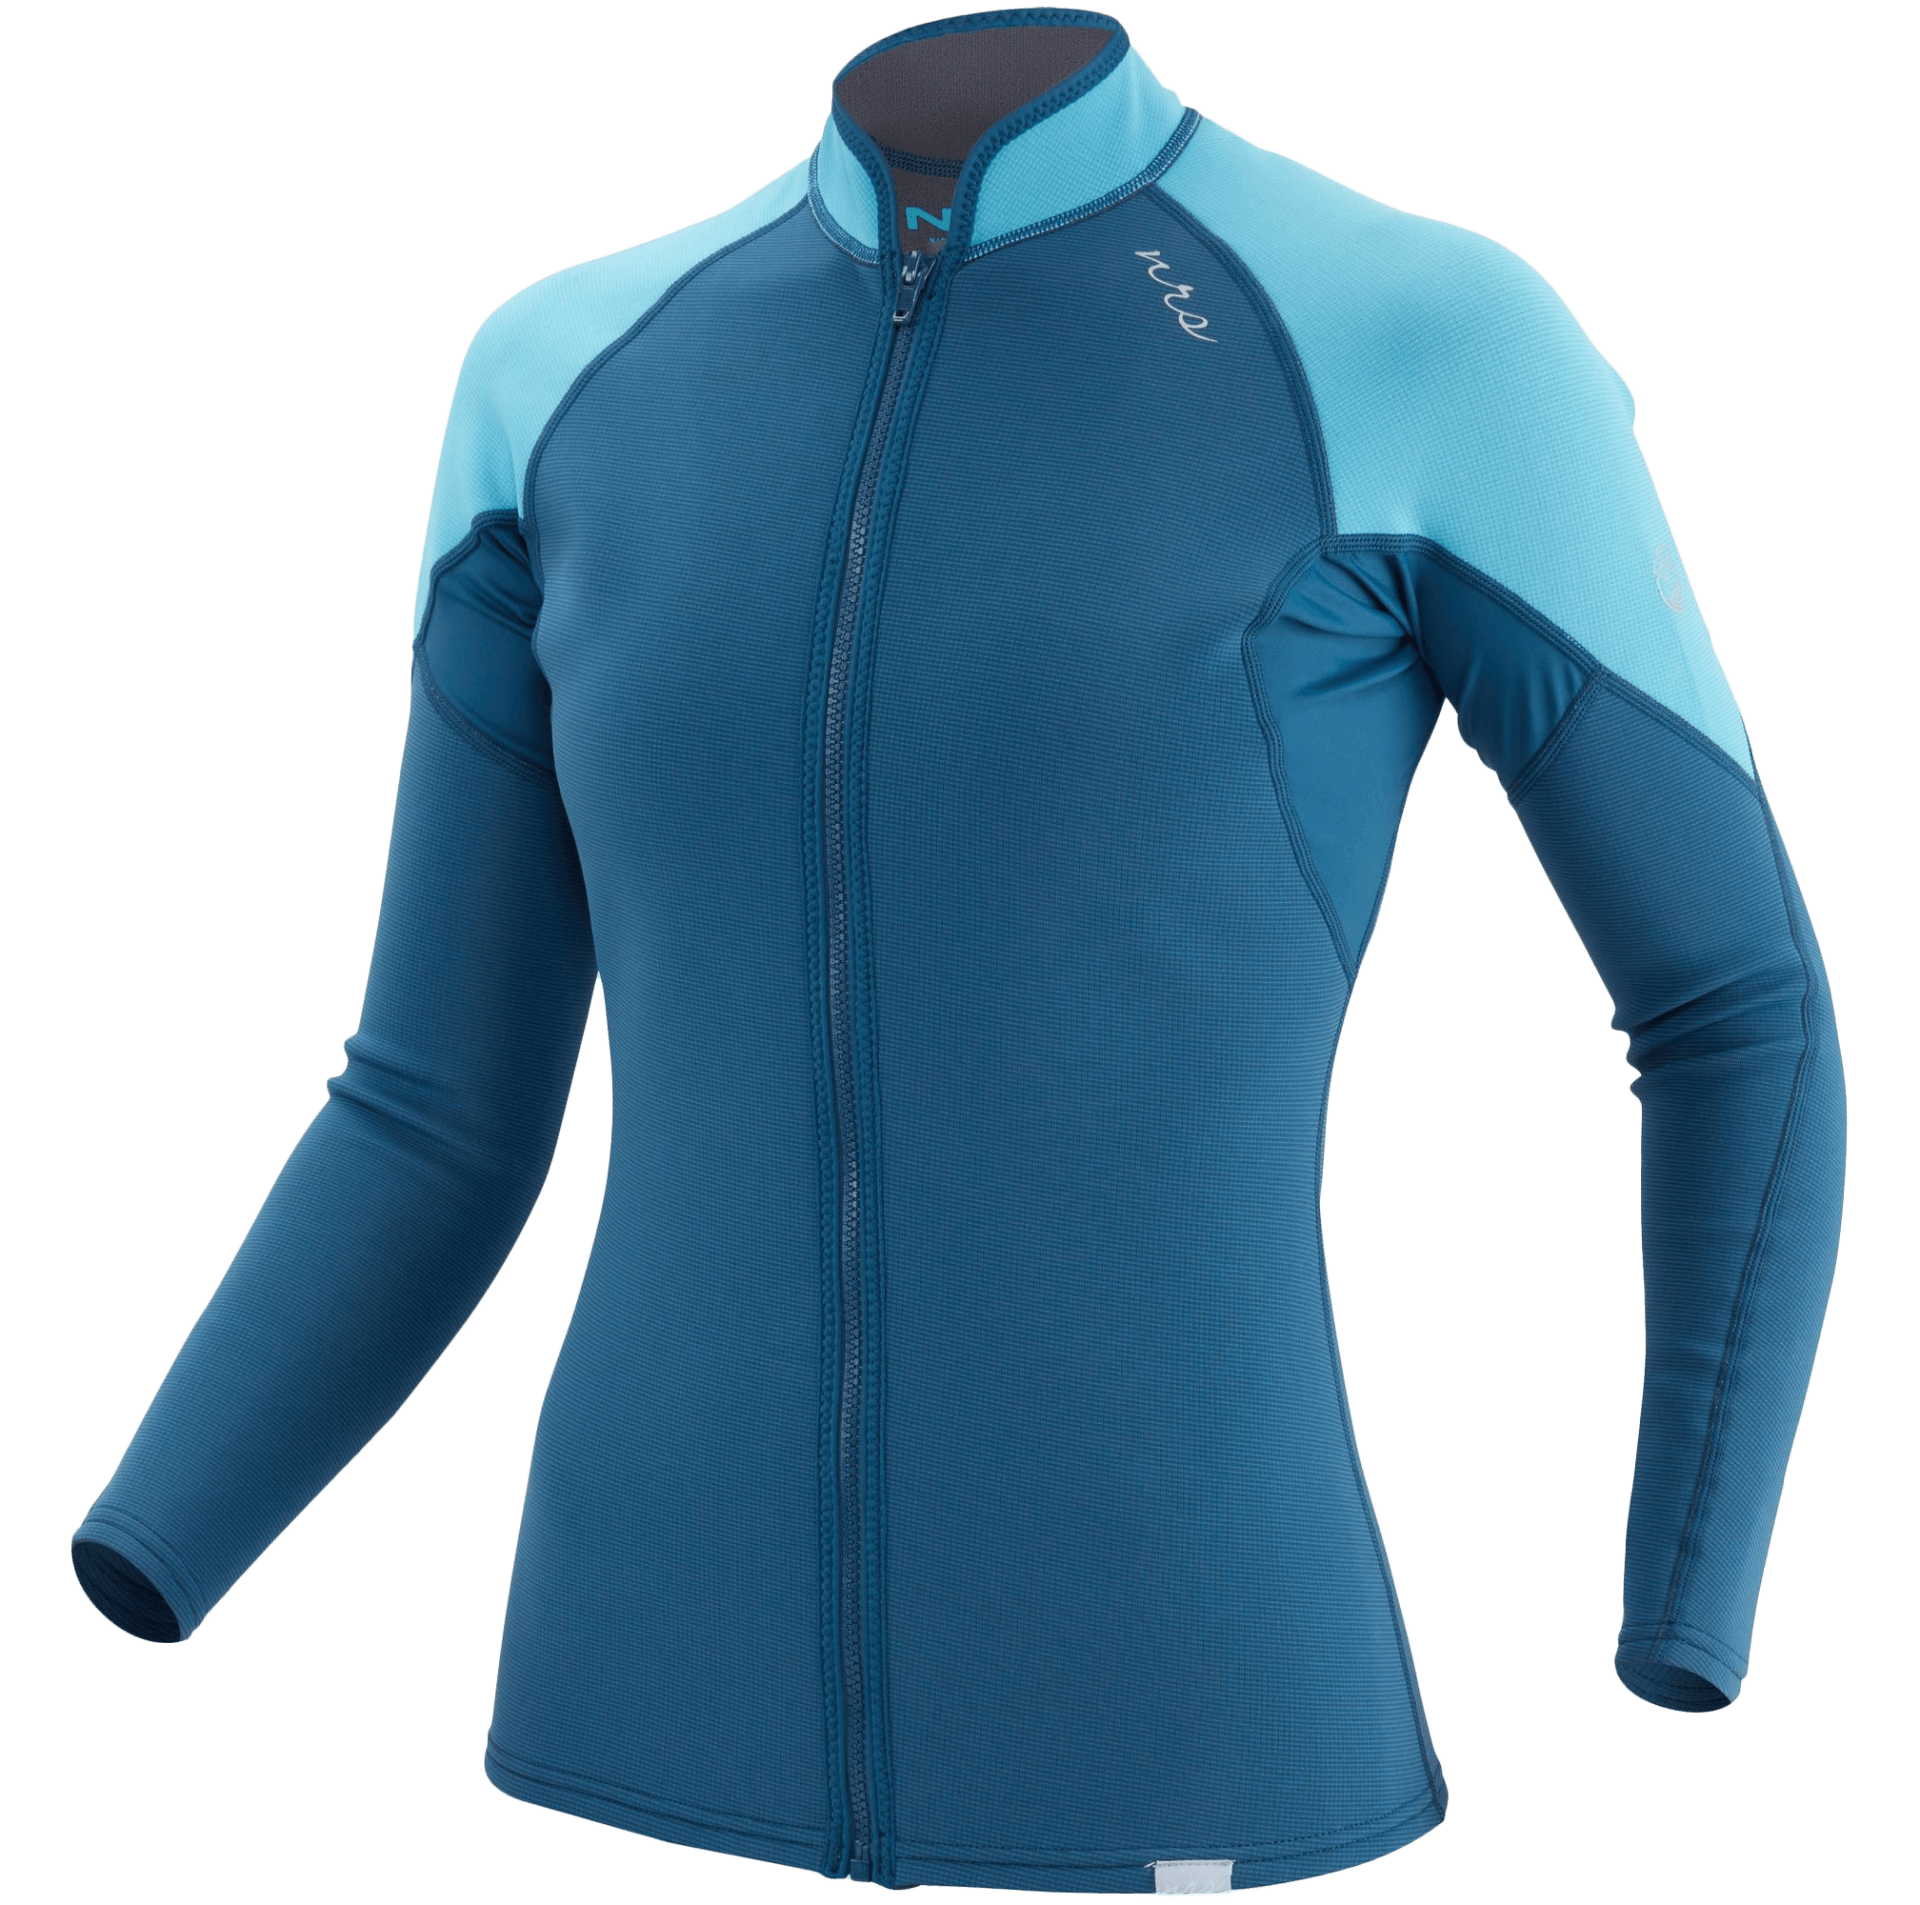 nrs_w_hydroskin_05mm_jacket_left_angle.png